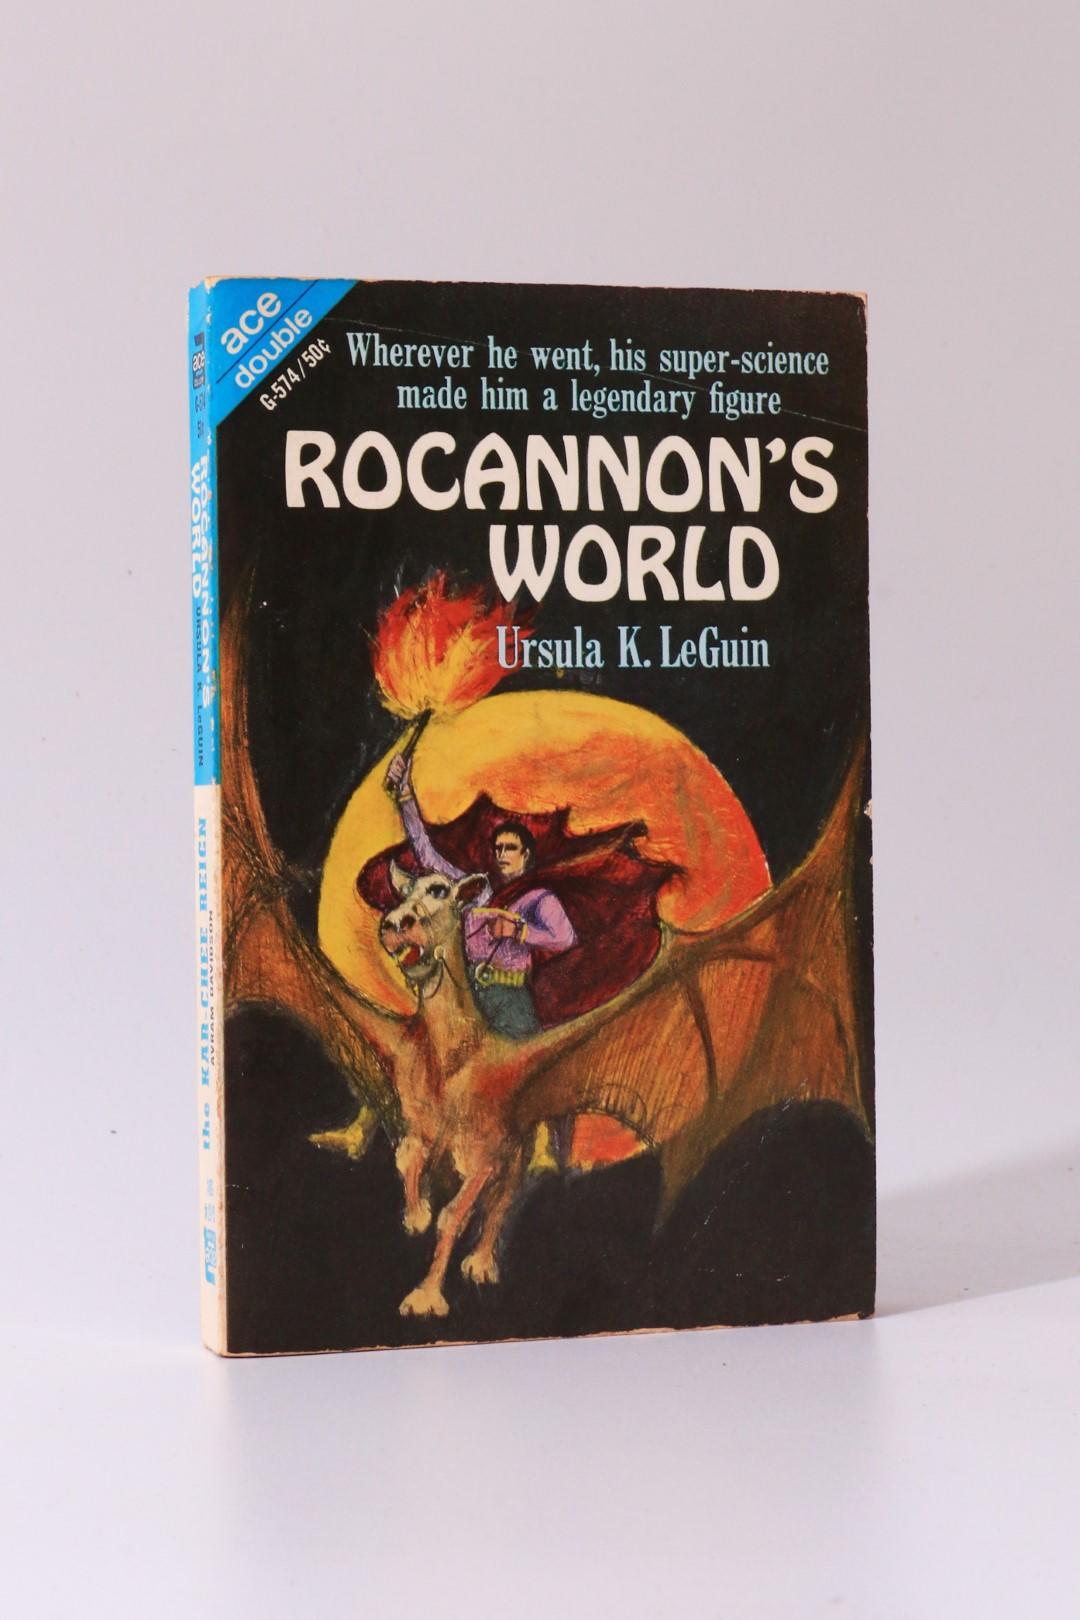 Ursula K. Le Guin - Rocannon's World - Ace Books, 1966, Signed First Edition.